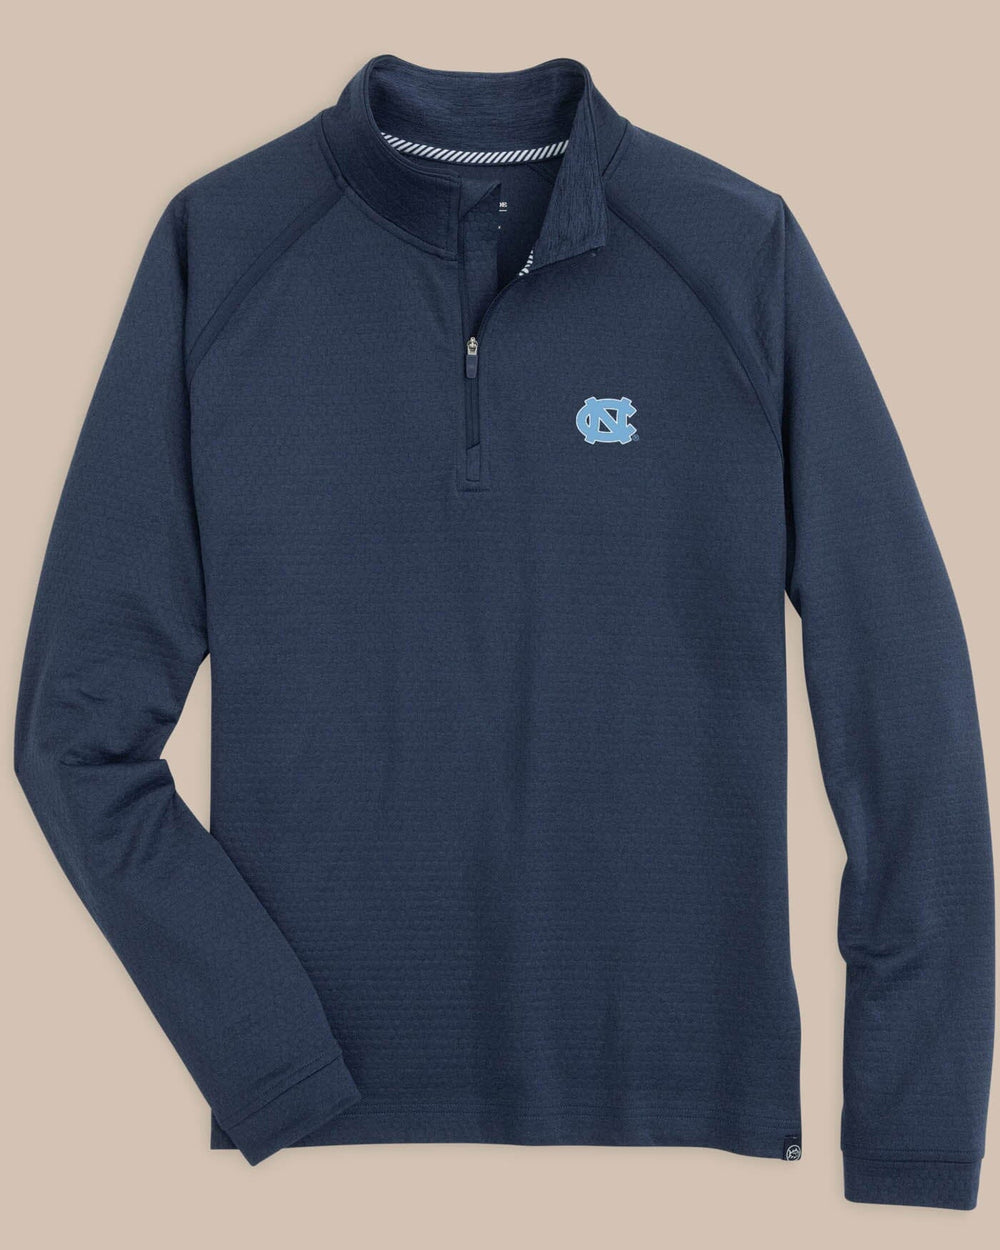 The front view of the UNC Tar Heels Scuttle Heather Quarter Zip by Southern Tide - Heather True Navy